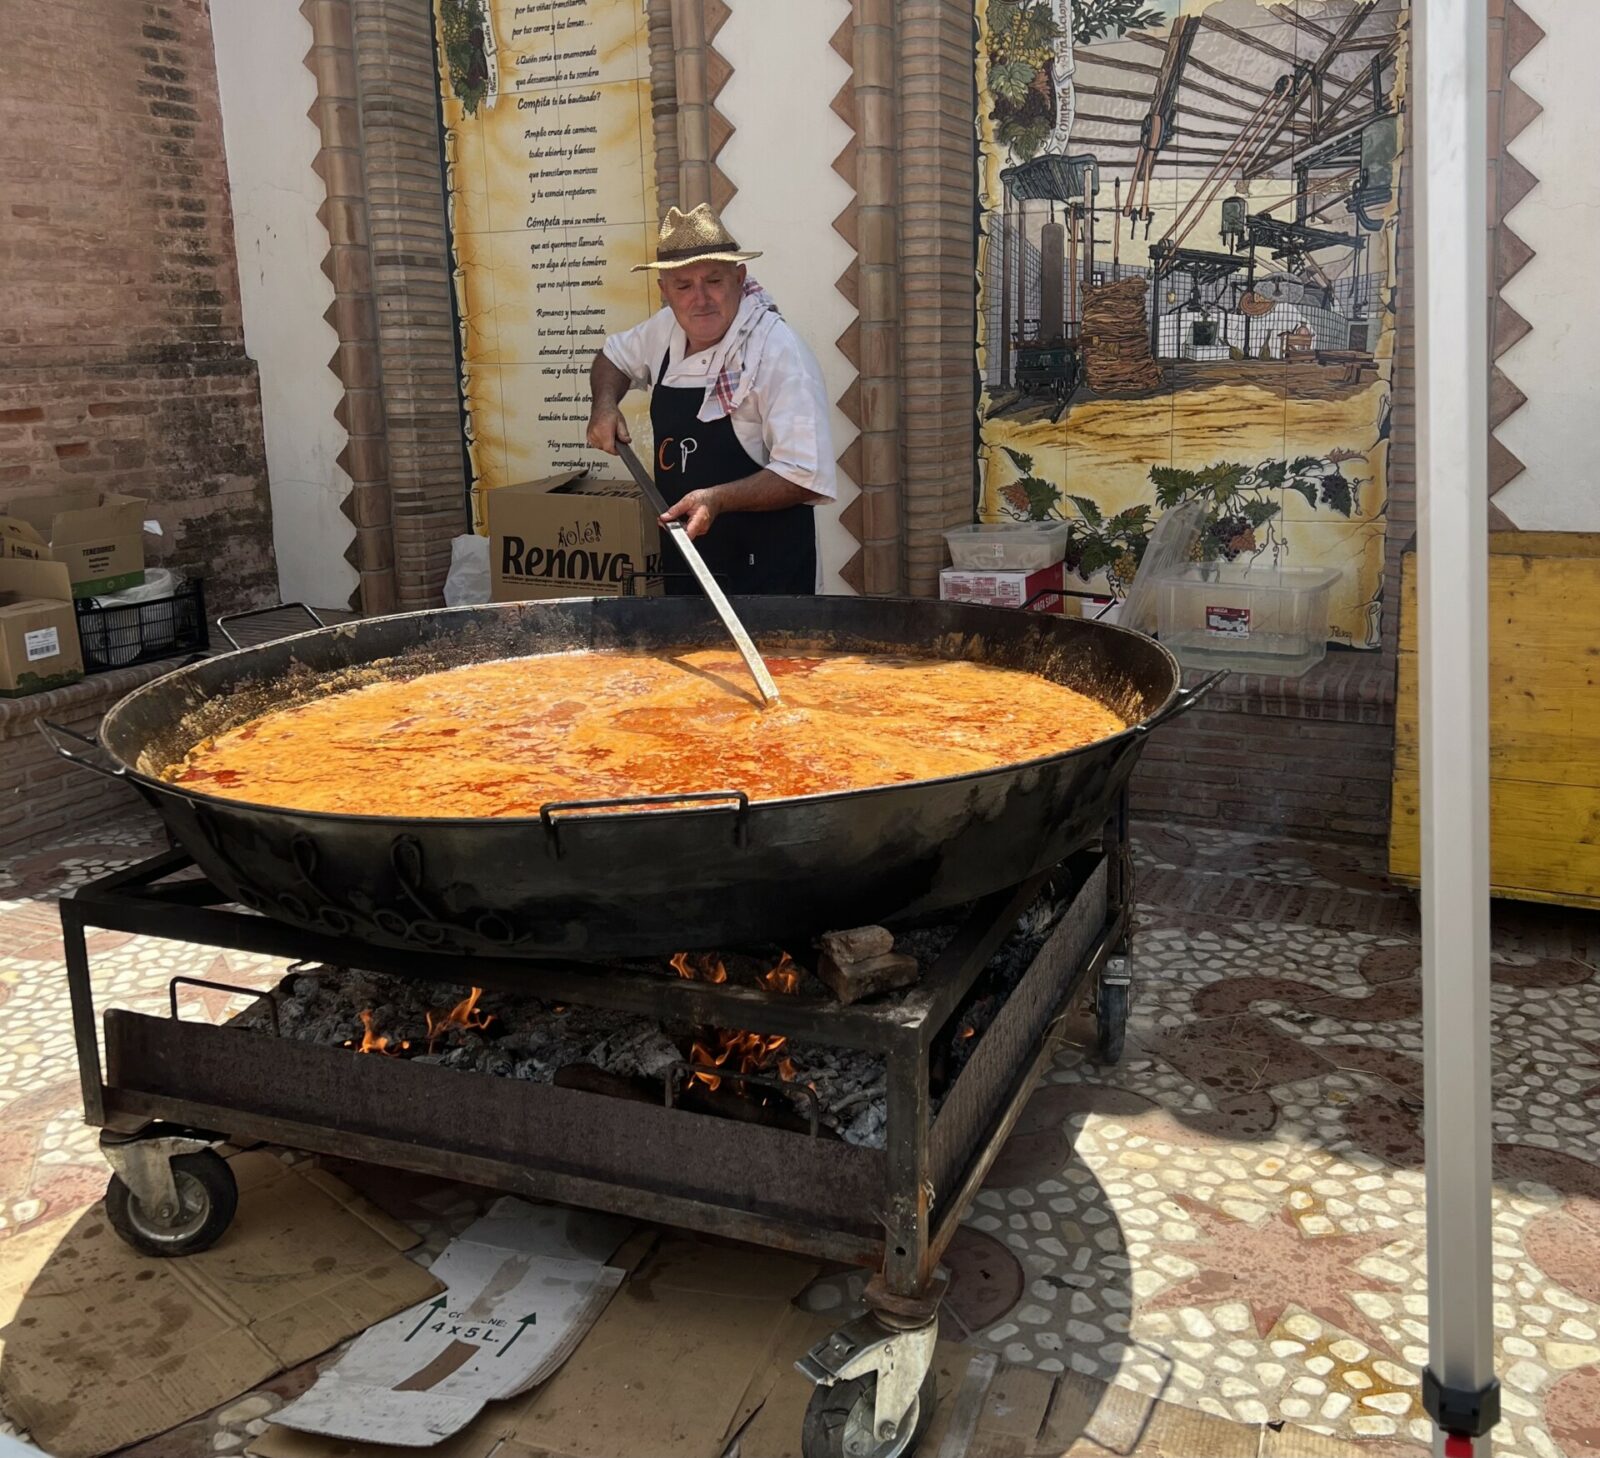 The image shows a local Competeño preparing a vast paella which will be given free to visitors at the Cómpeta Summer Feria